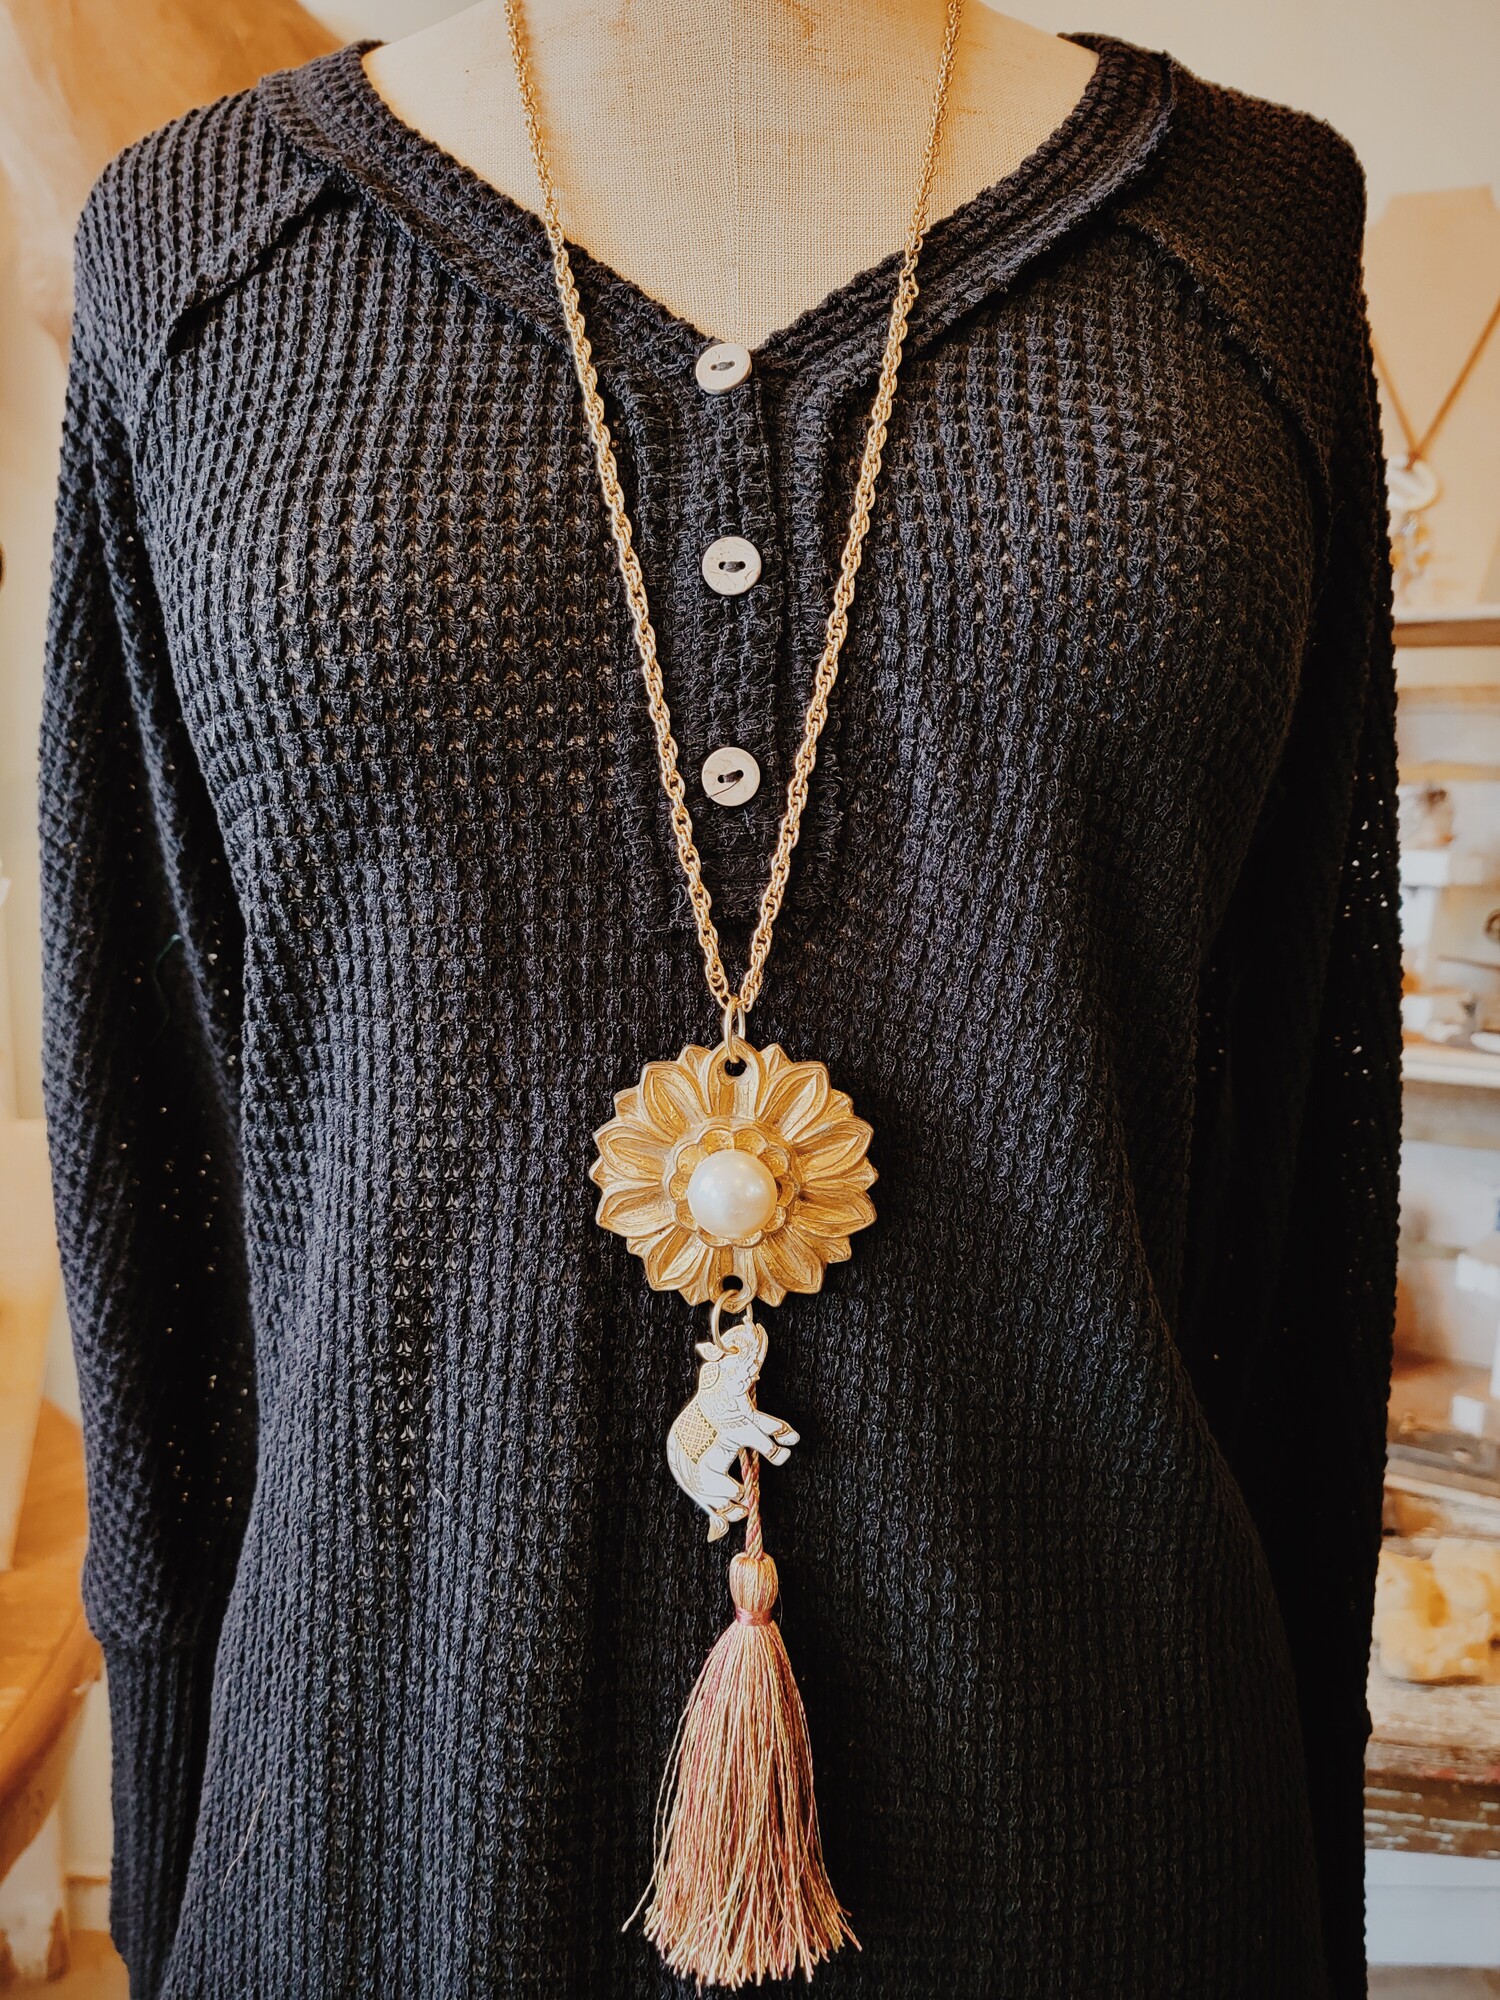 This beautiful necklace was hand crafted! It has a vintage floral medallion as the pendant with a pearl center, and a lovely white, gold, and black elephant hangs from it. The tassel is 4 inches long, and the chain is 34 inches.